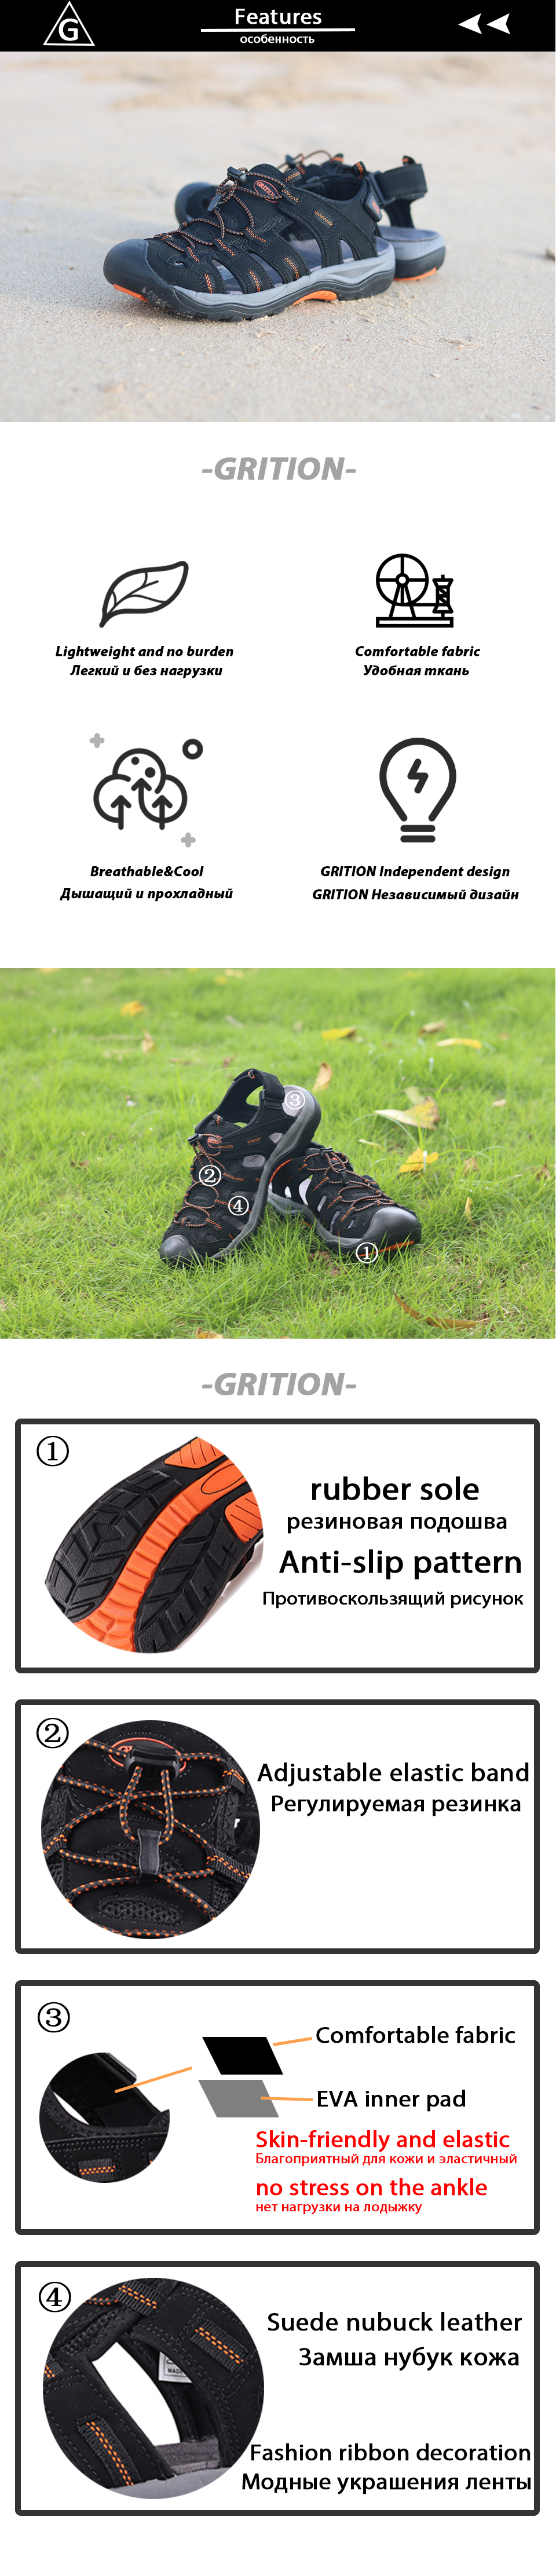 GRITION Men Sandals Leather Nubuck Gladiator Male Outdoor Beach Summer Shoes Fashion Close Toe Non-slip Casual Comfortable Clogs